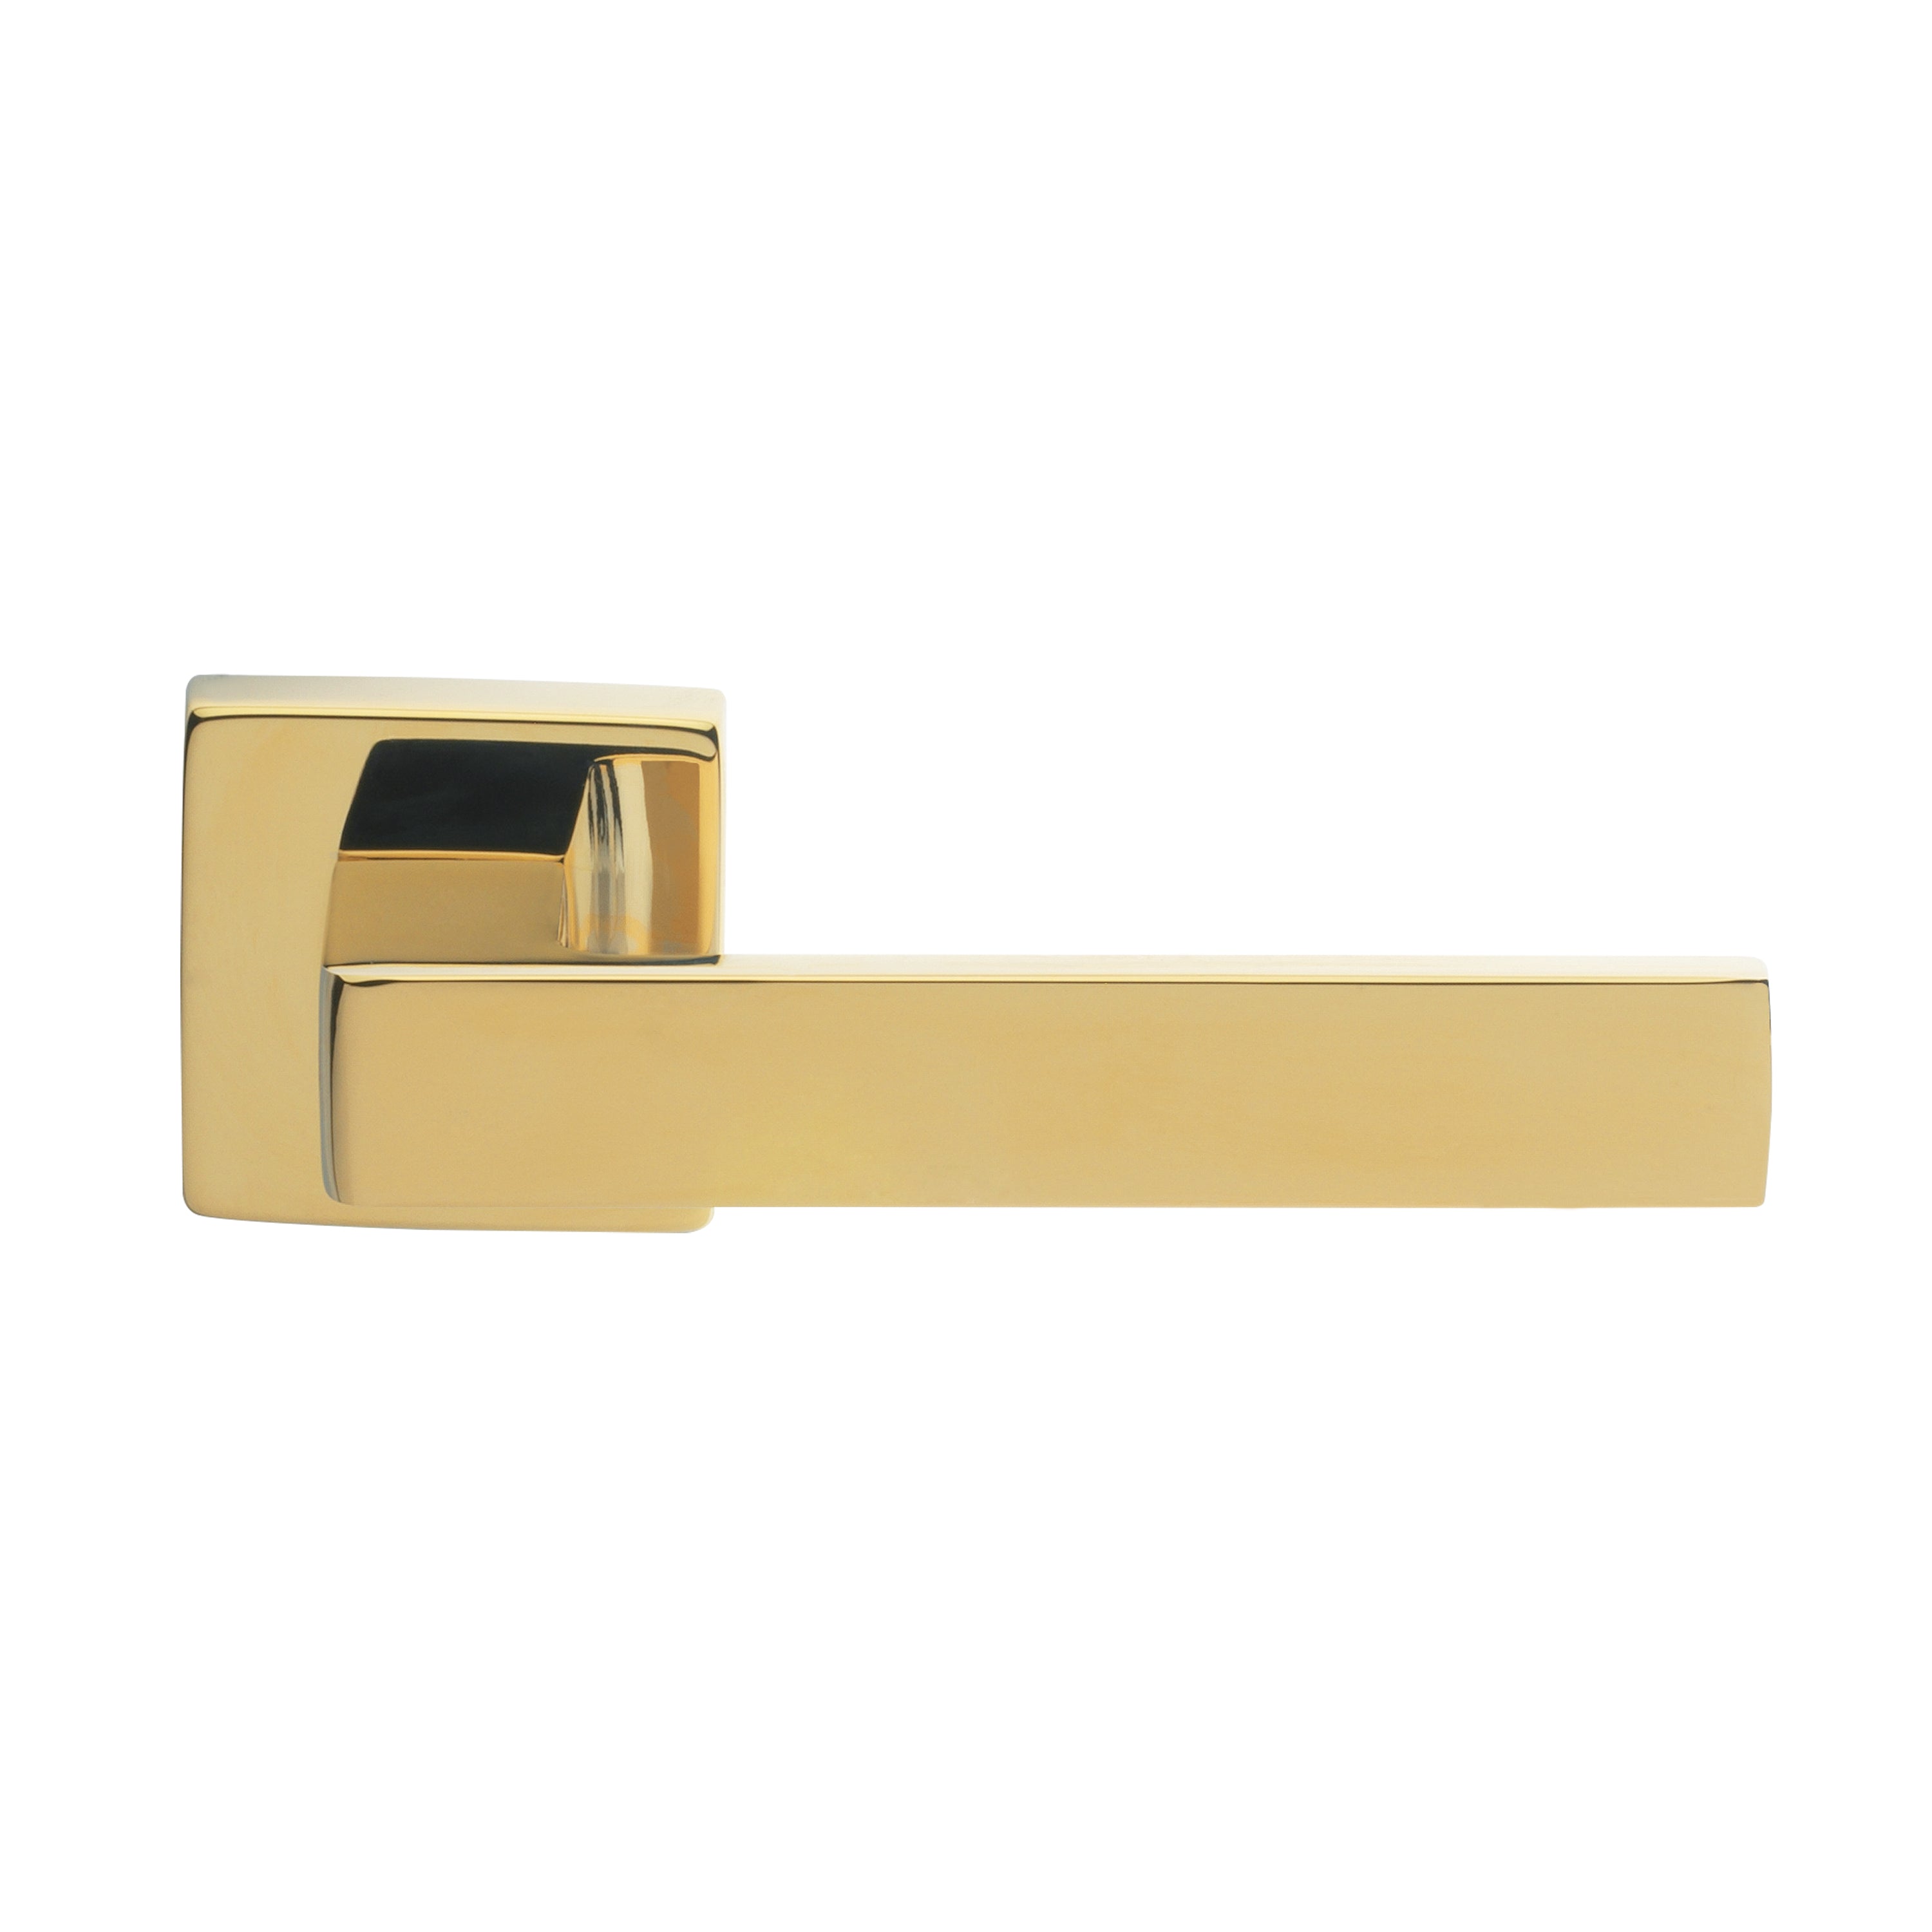 Manital Techna Italian Door Handle PVD or Chrome Plated or NIS  With Free Cylinder and Machine